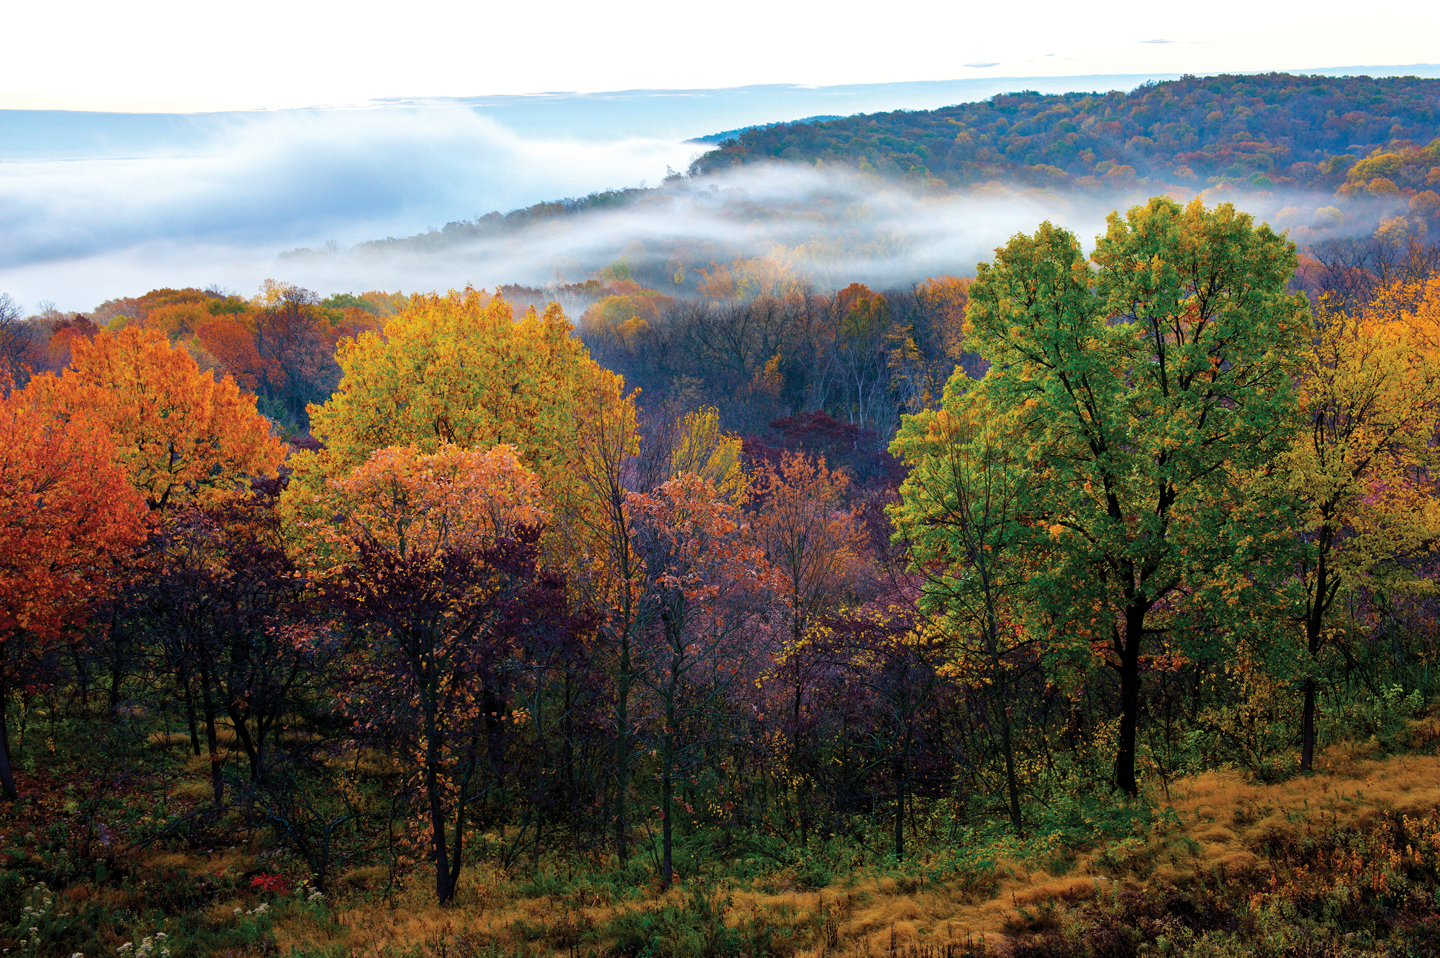 Read More: Find opportunities for fall color at these 9 Nebraska state parks